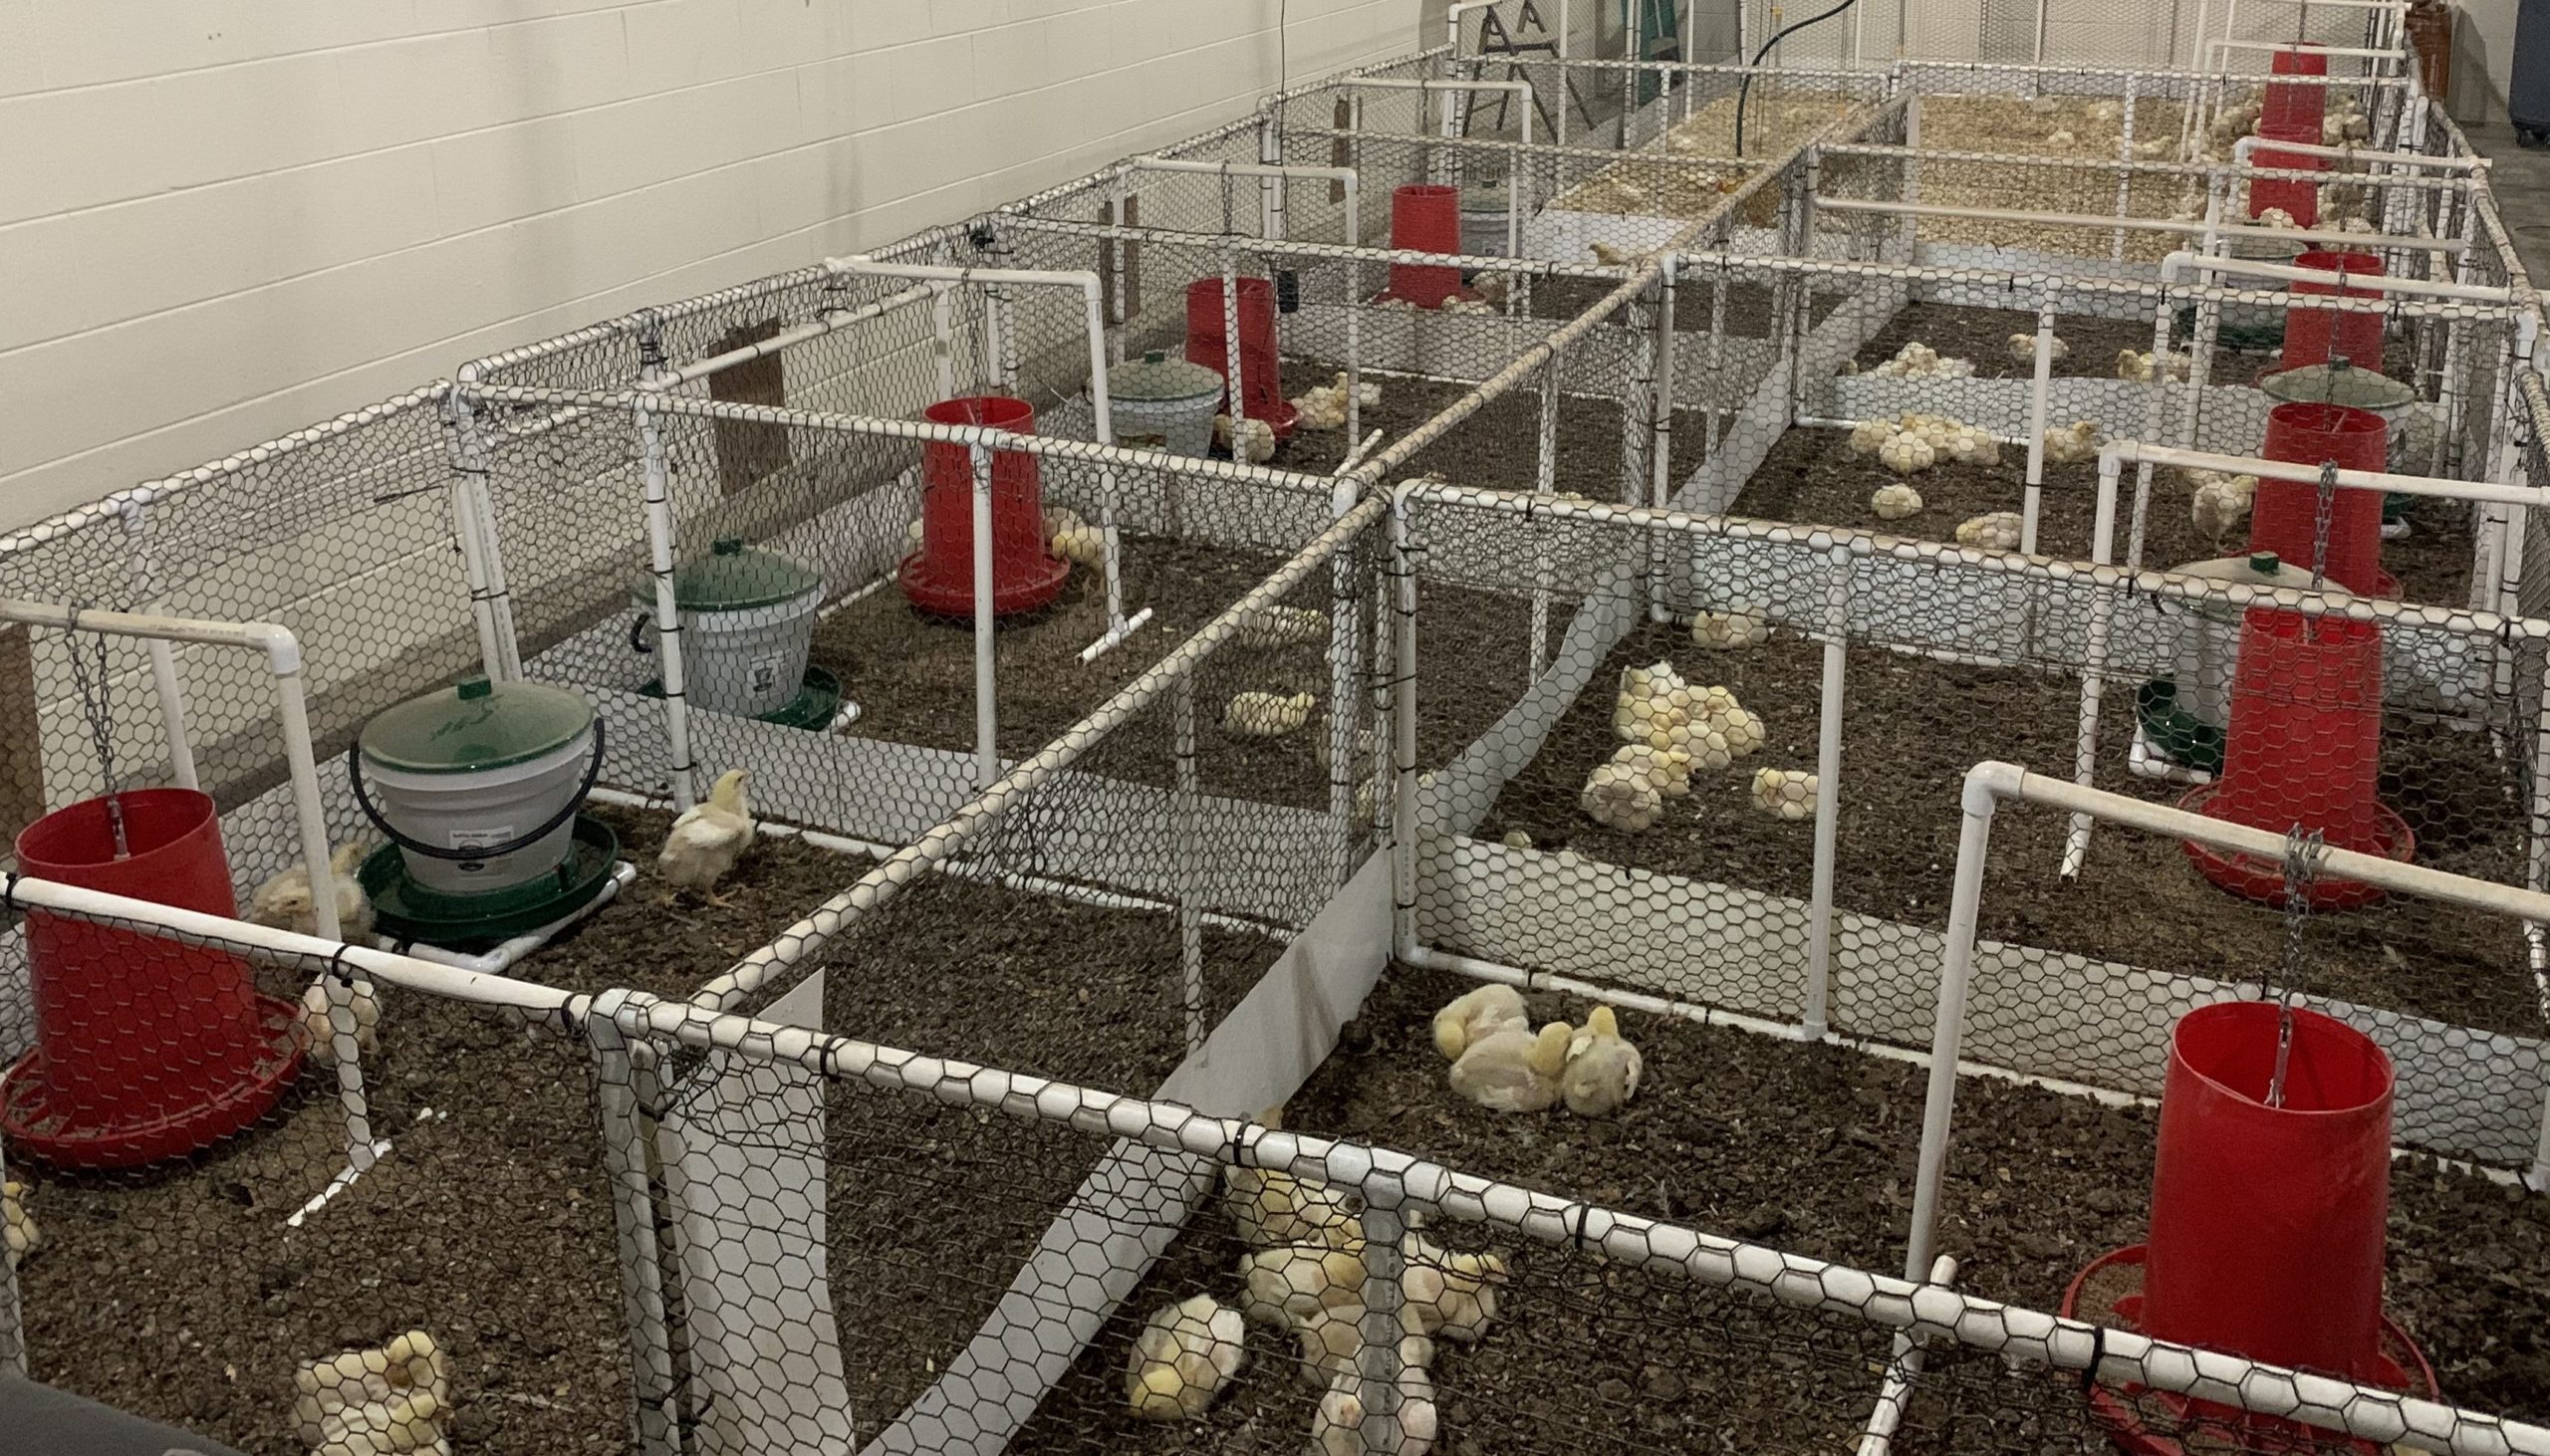 Chickens in pens